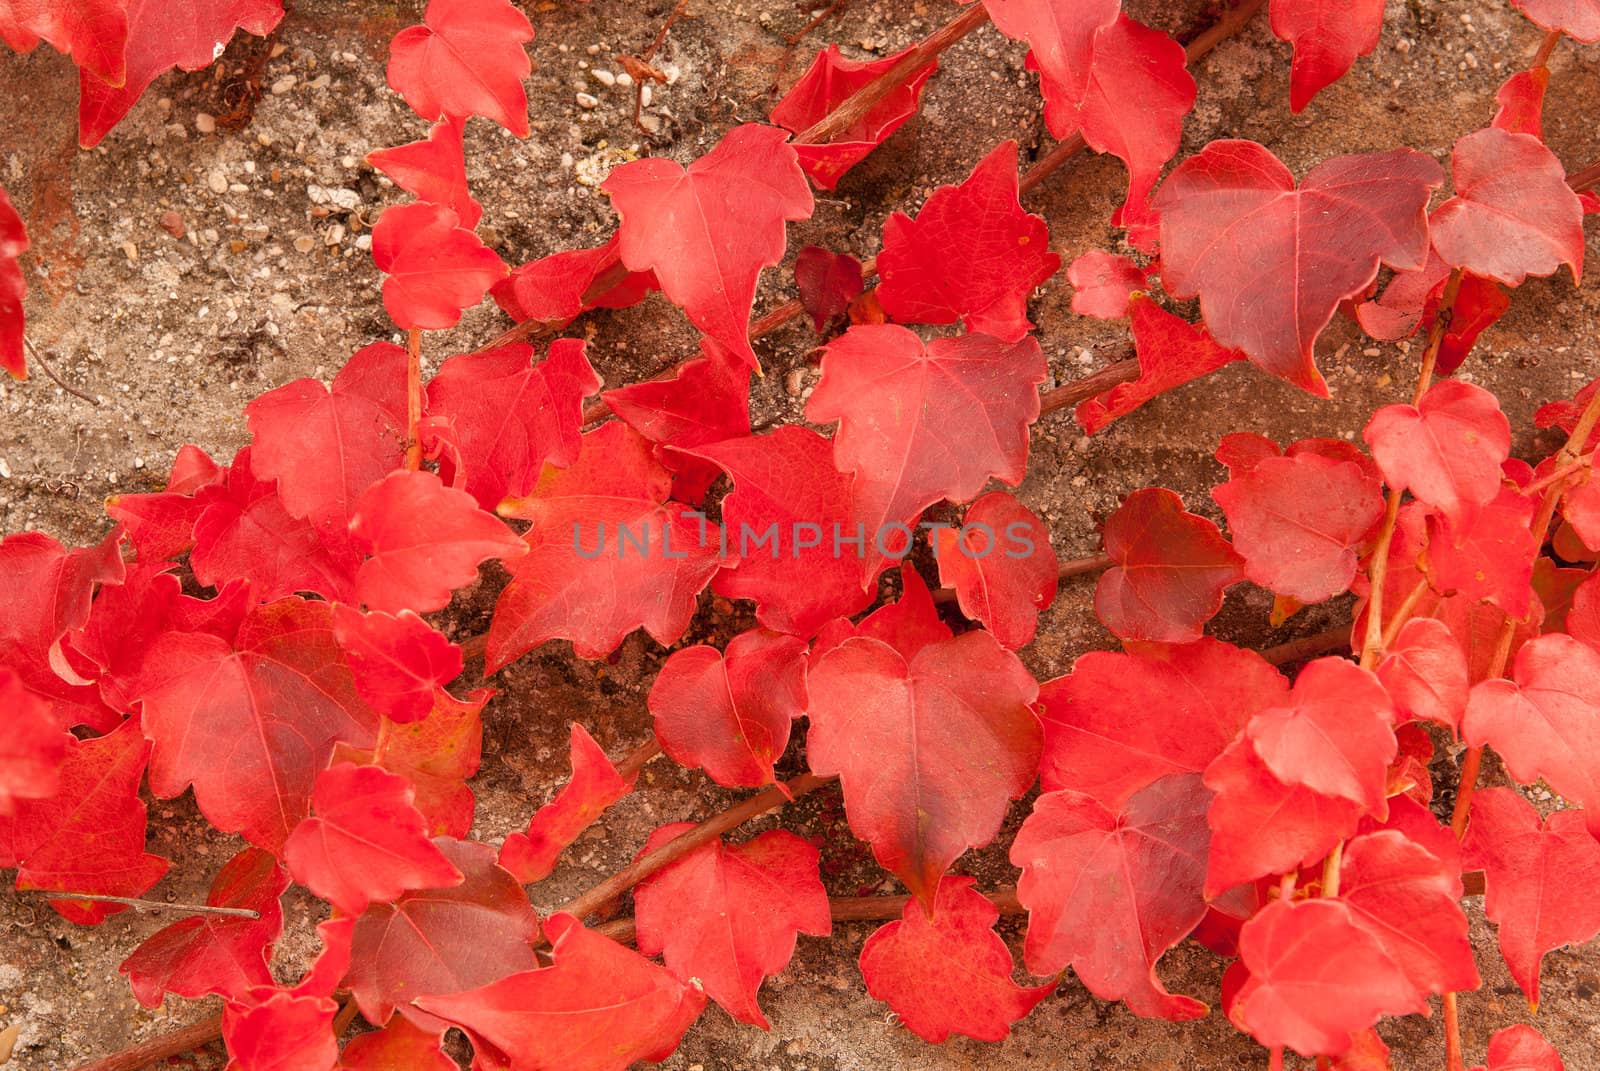 The old wall covered with scarlet leaves icloseup by Larisa13